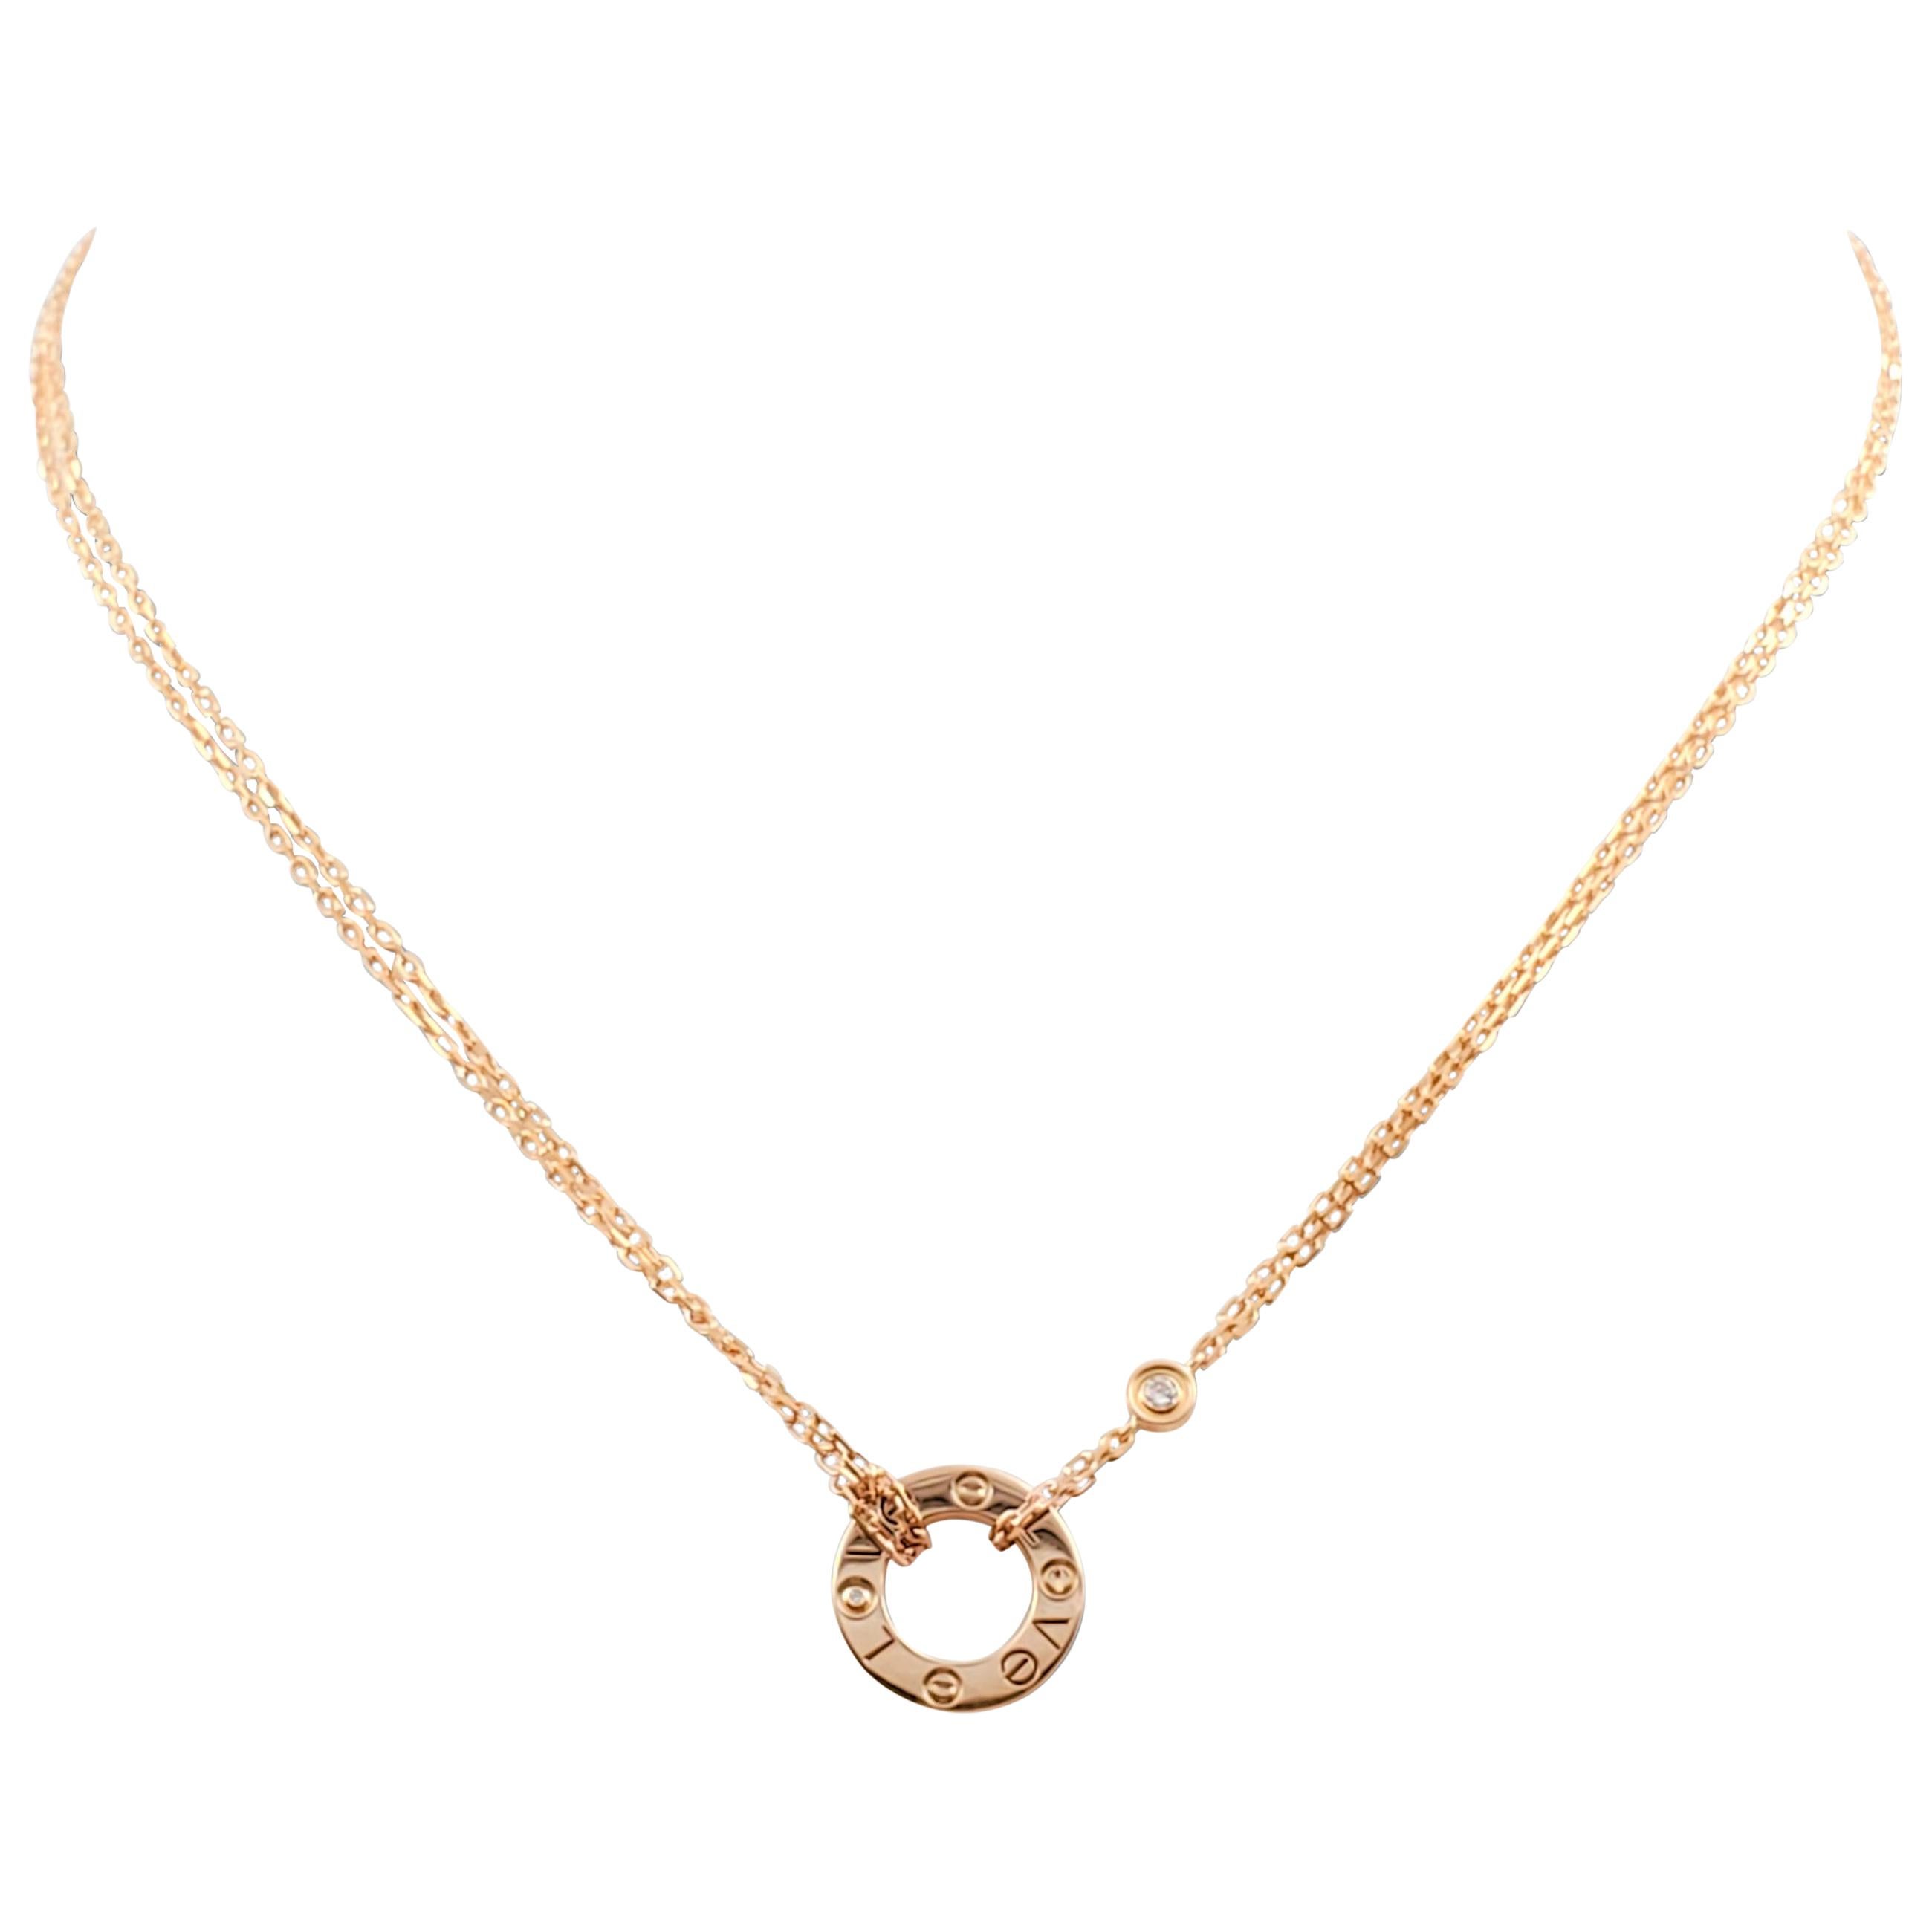 Cartier 'Love' Rose Gold and Diamond Circle Charm Necklace